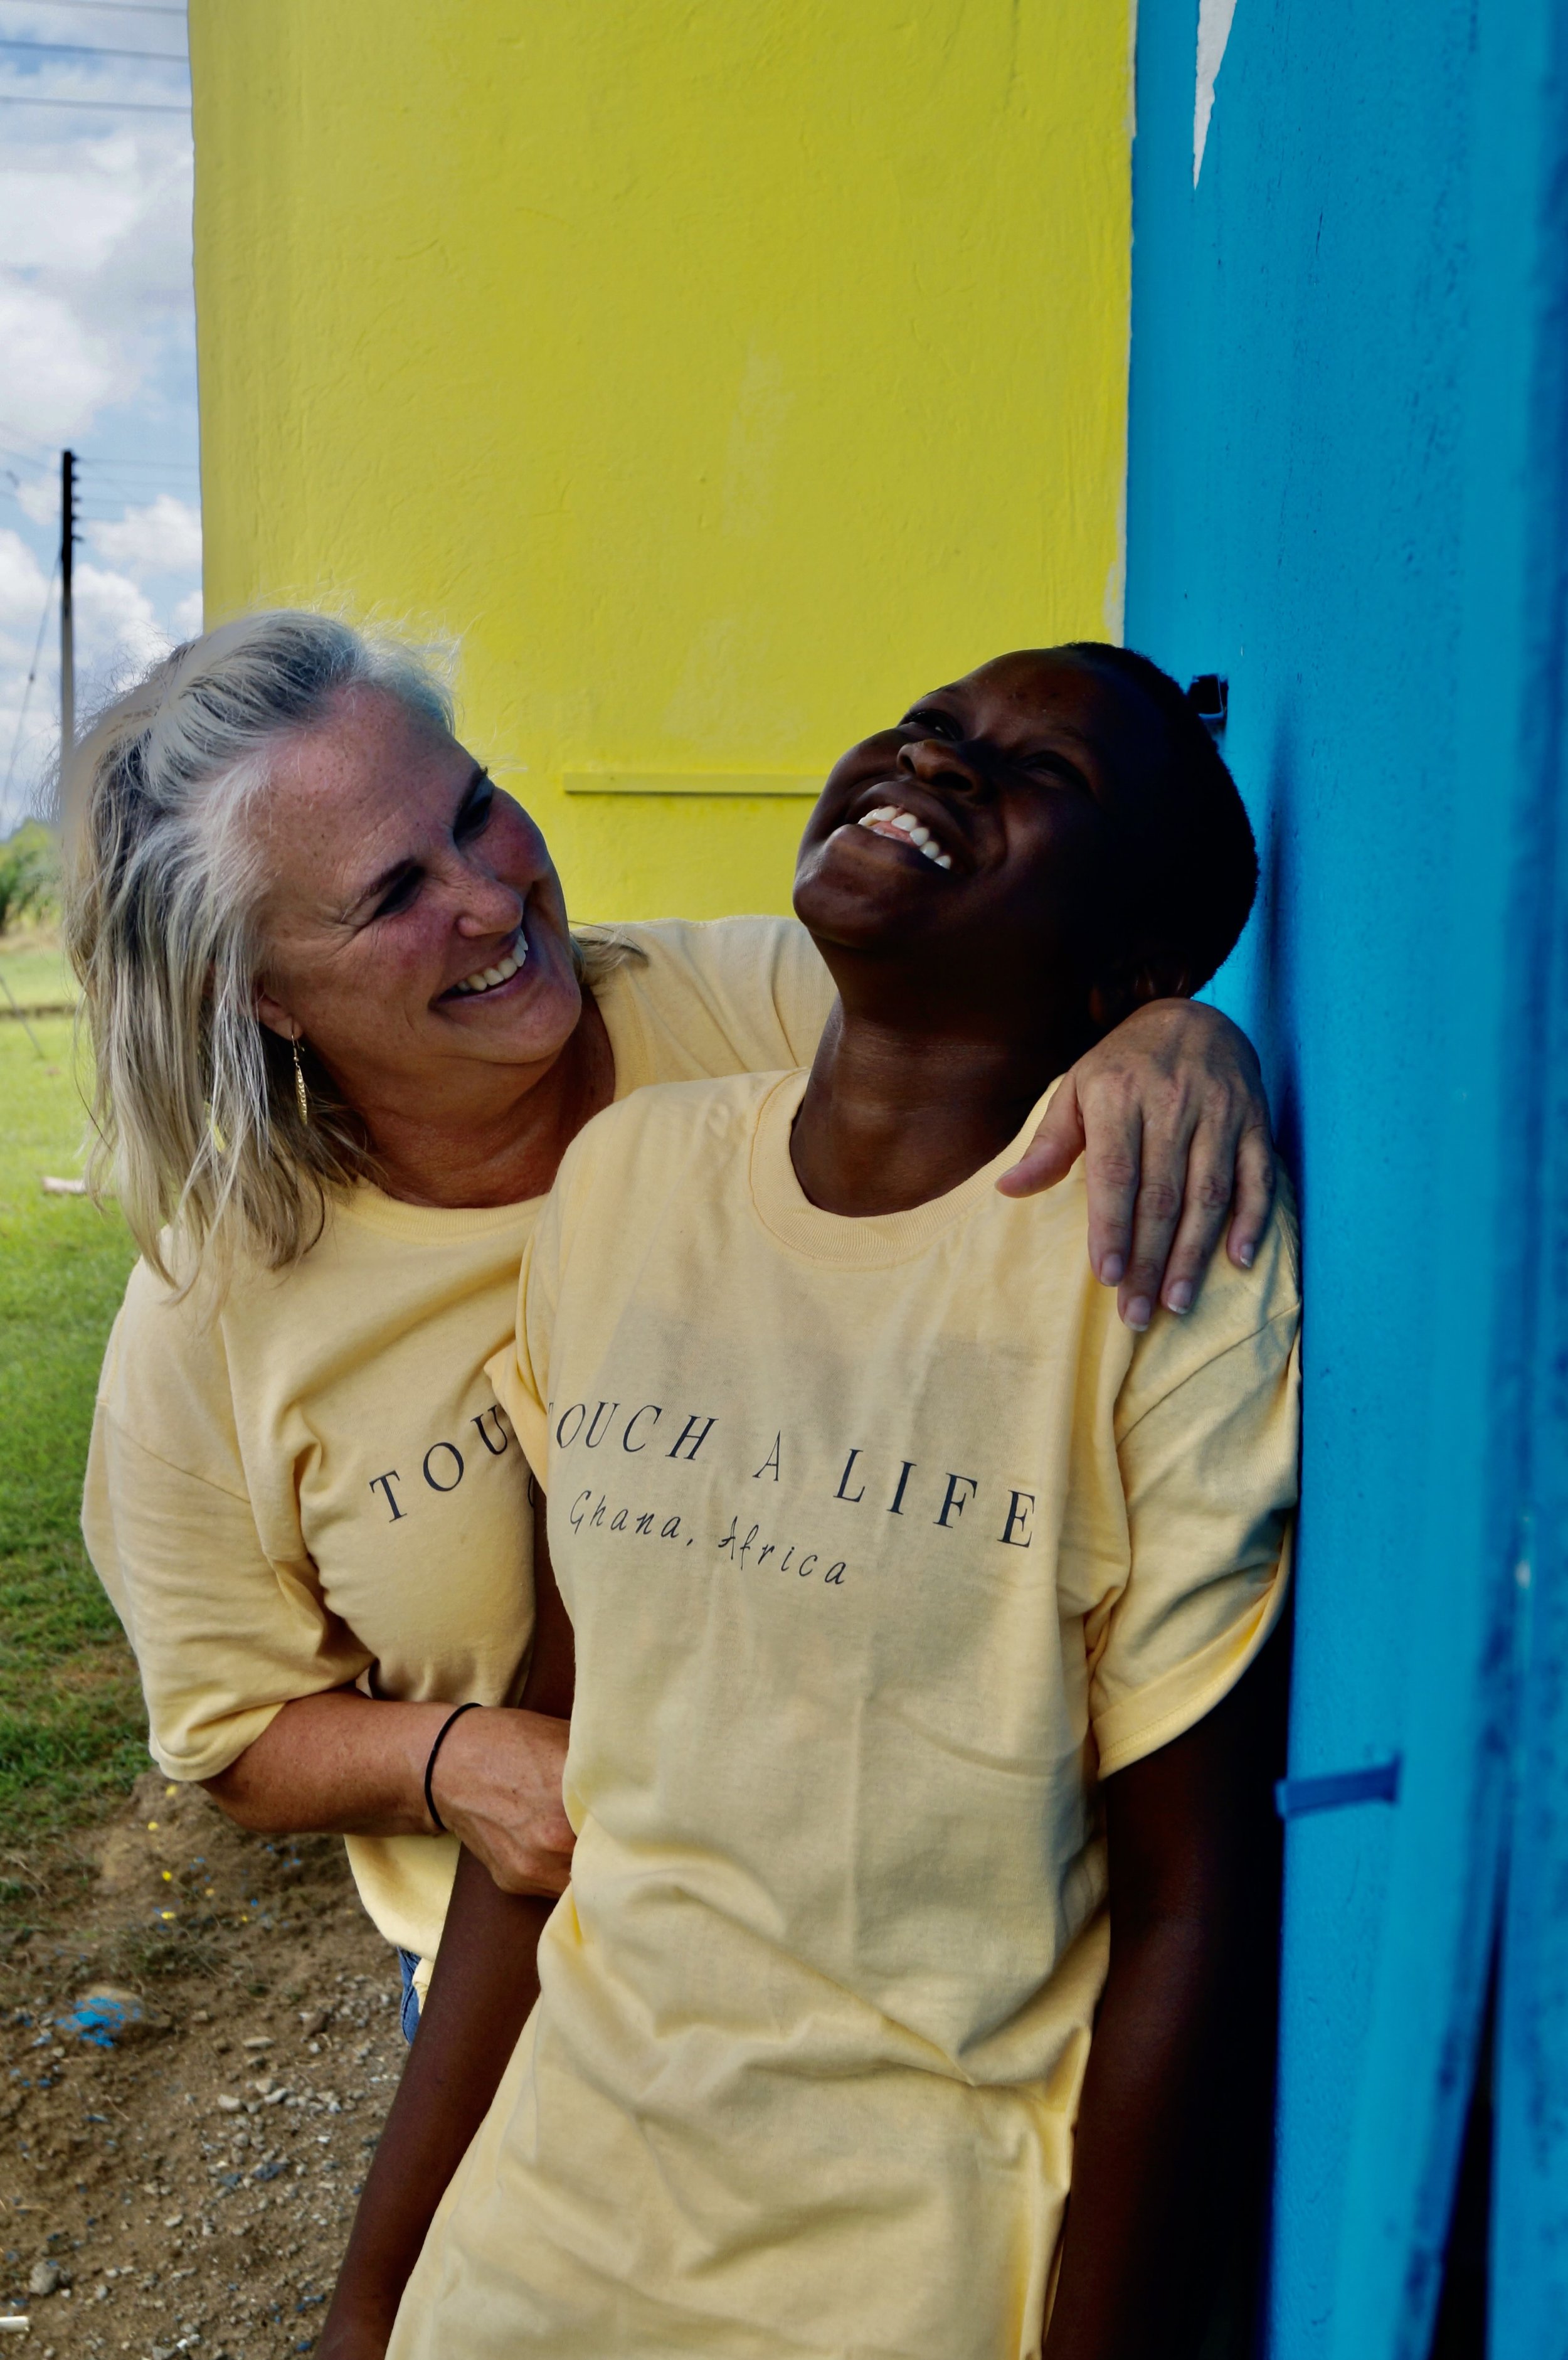  Jonna met Benedicta on her first trip to Ghana where an instant bond was formed. She has been sponsoring her care for 10+ years and the two communicate regularly. 